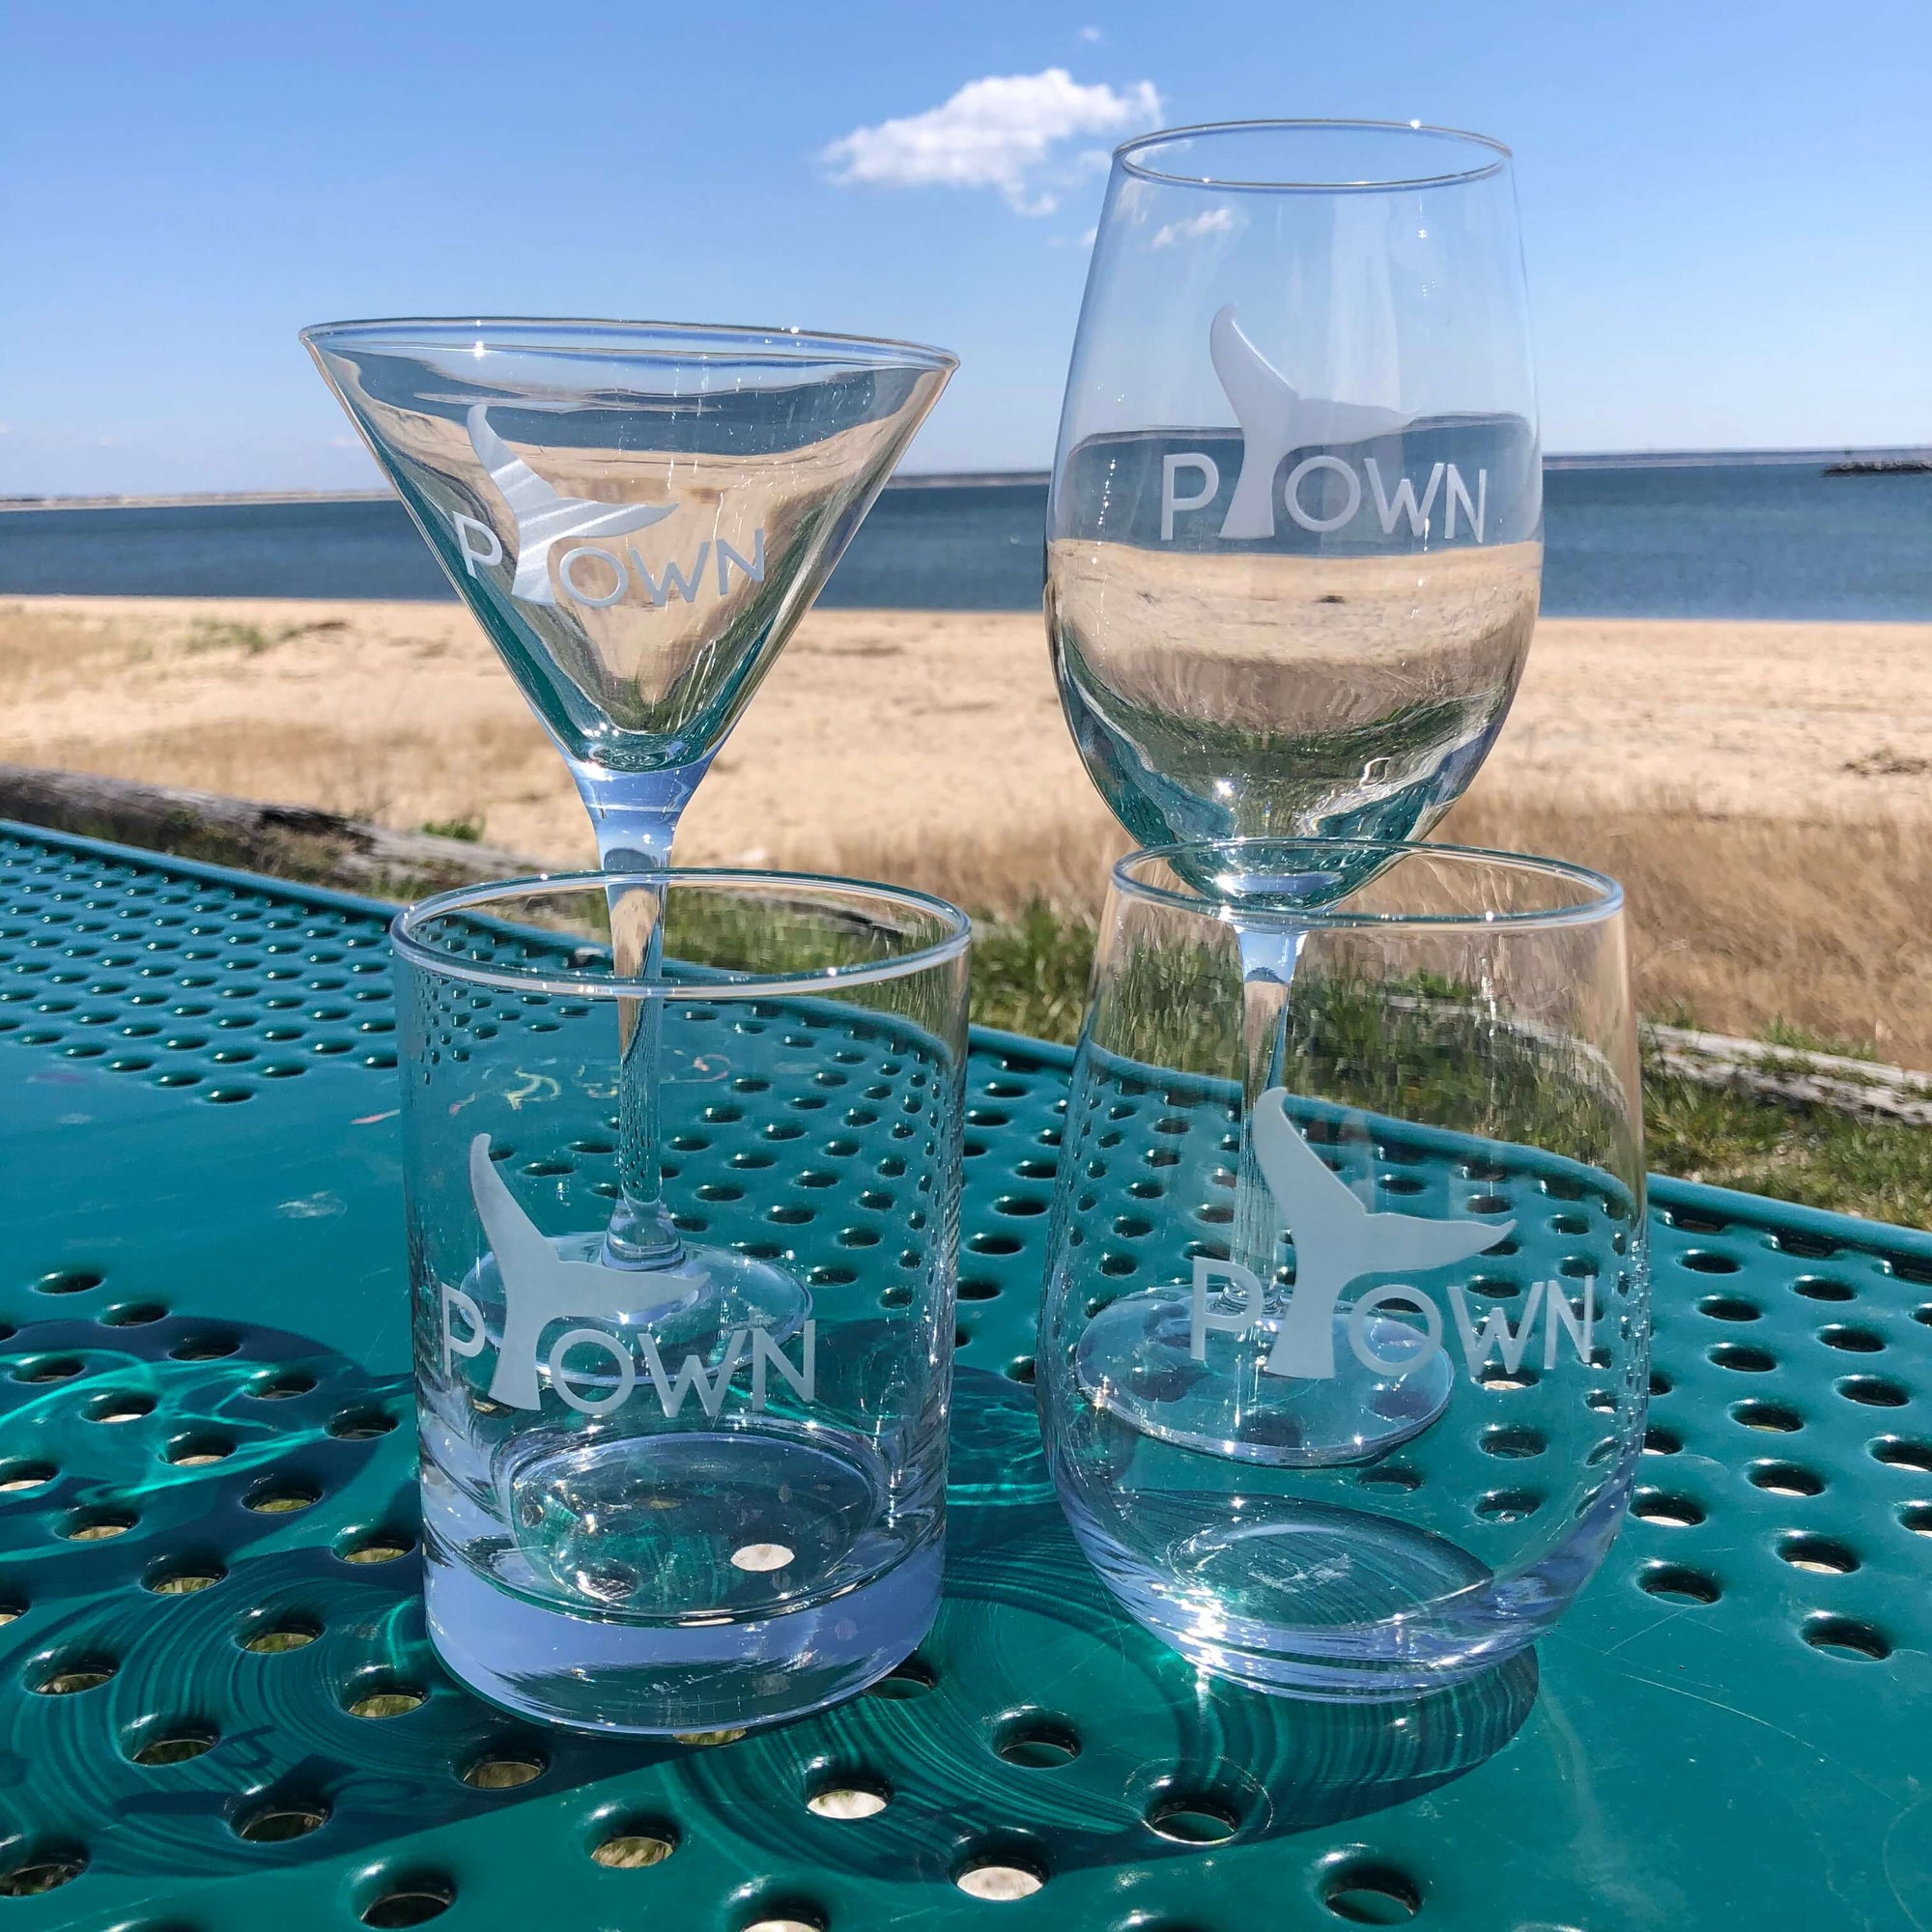 Ptown Whale etched glasses